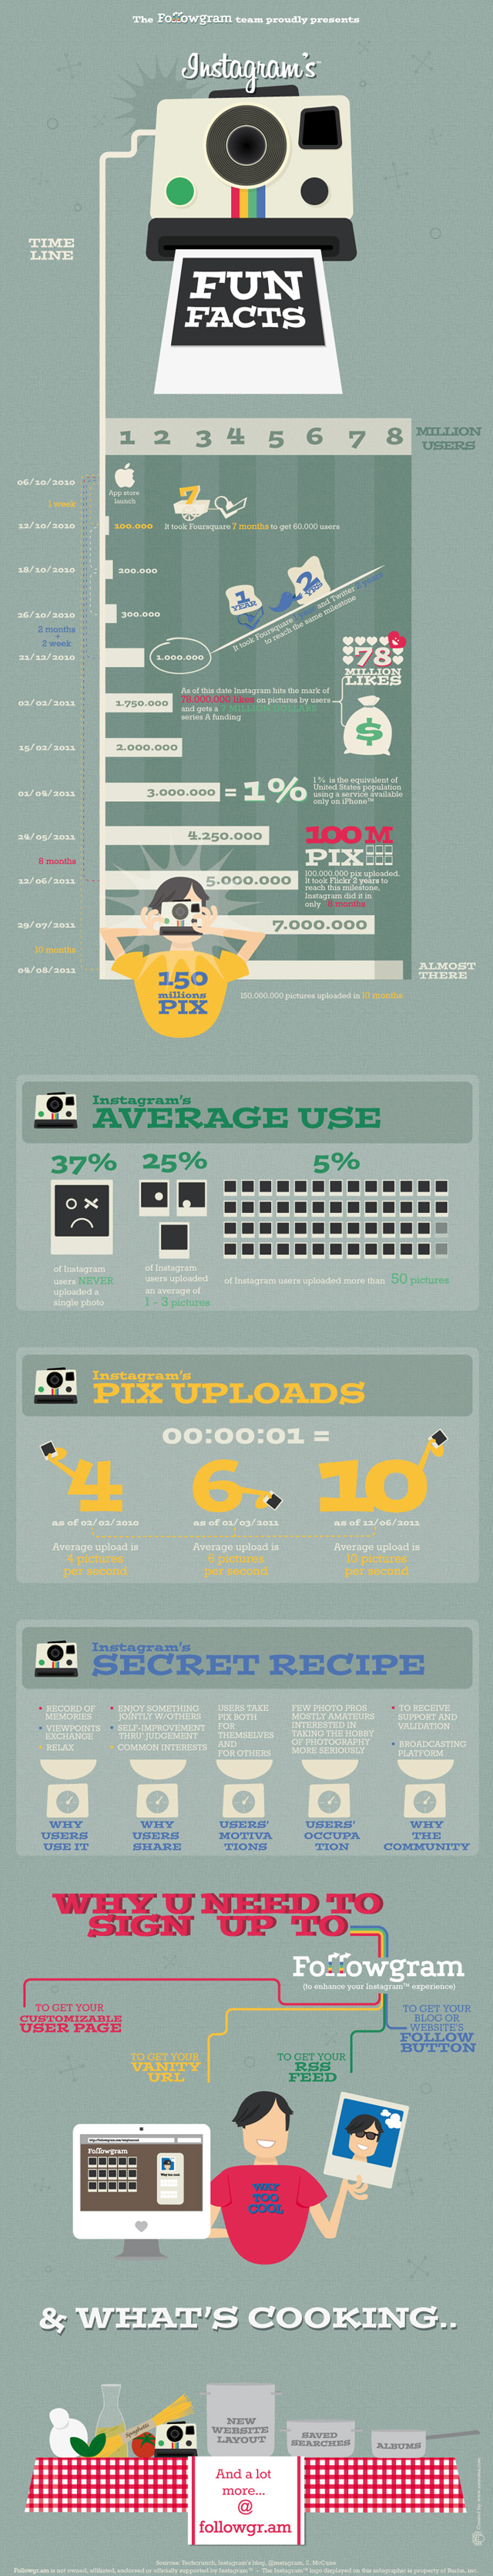 Instagram-Fun-Facts-infographic